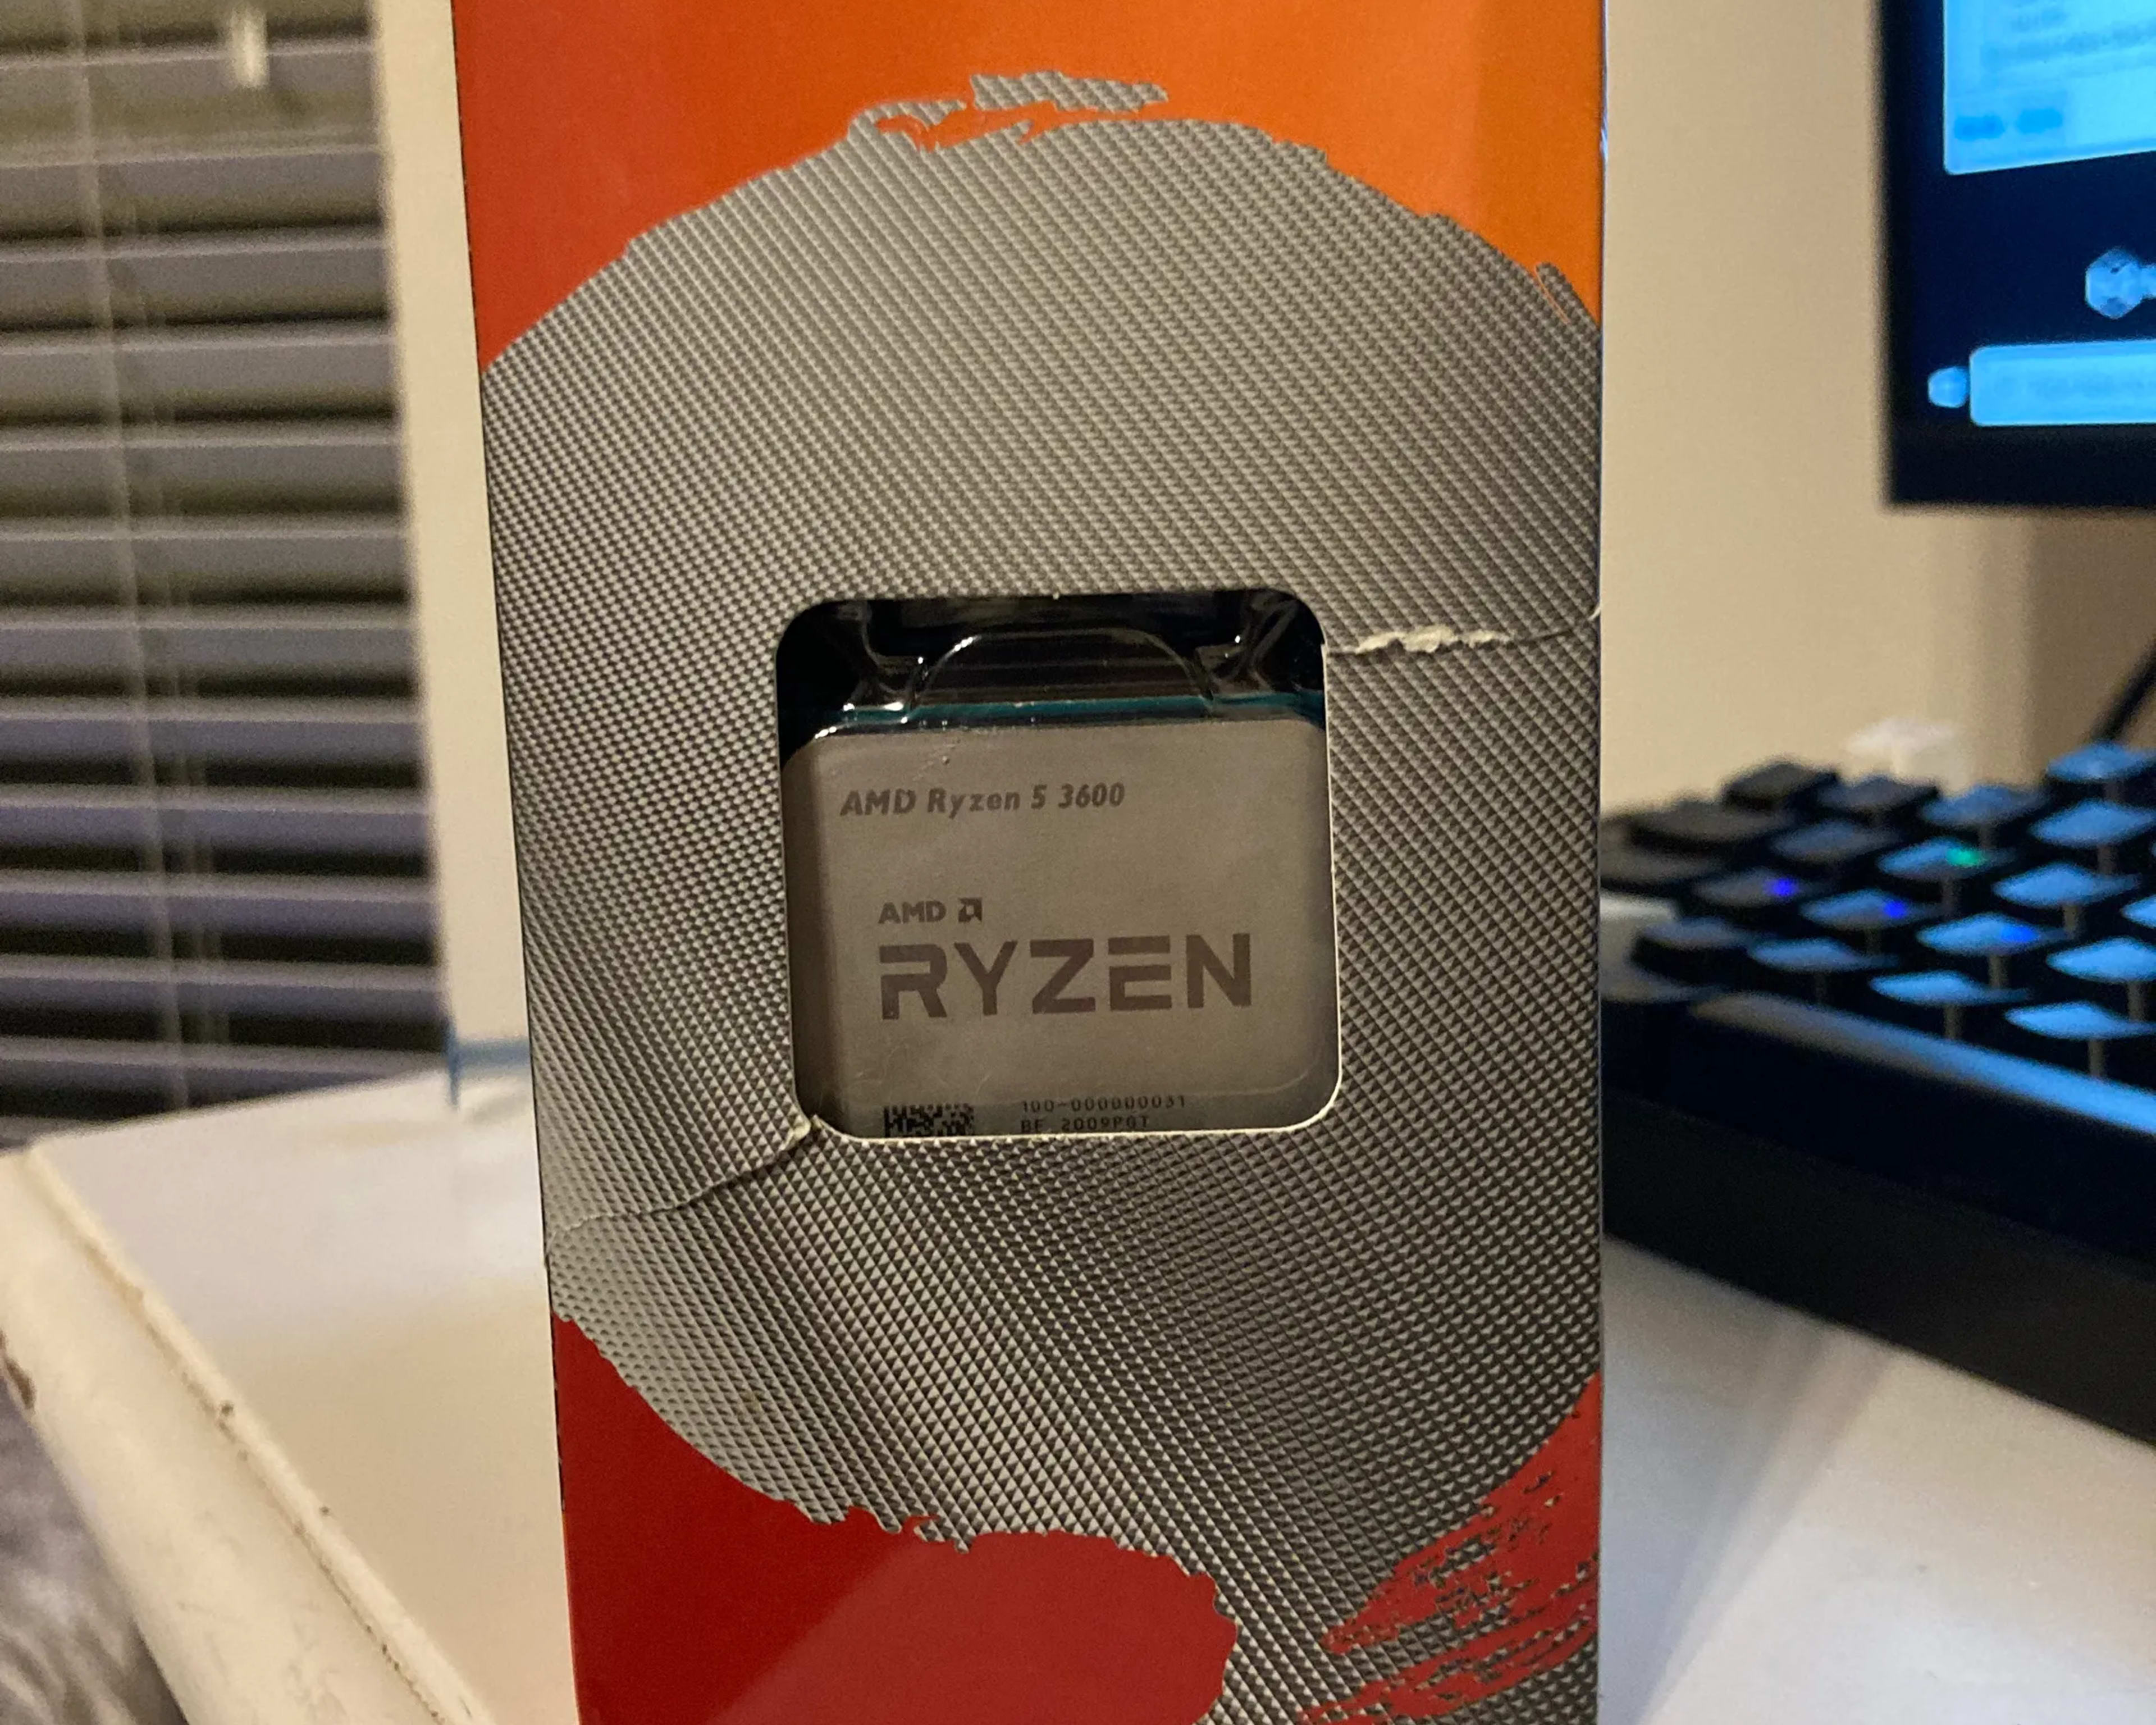 AMD Ryzen 5 3600 6-Core 4.2 GHz Gaming Processor with Wraith Cooler